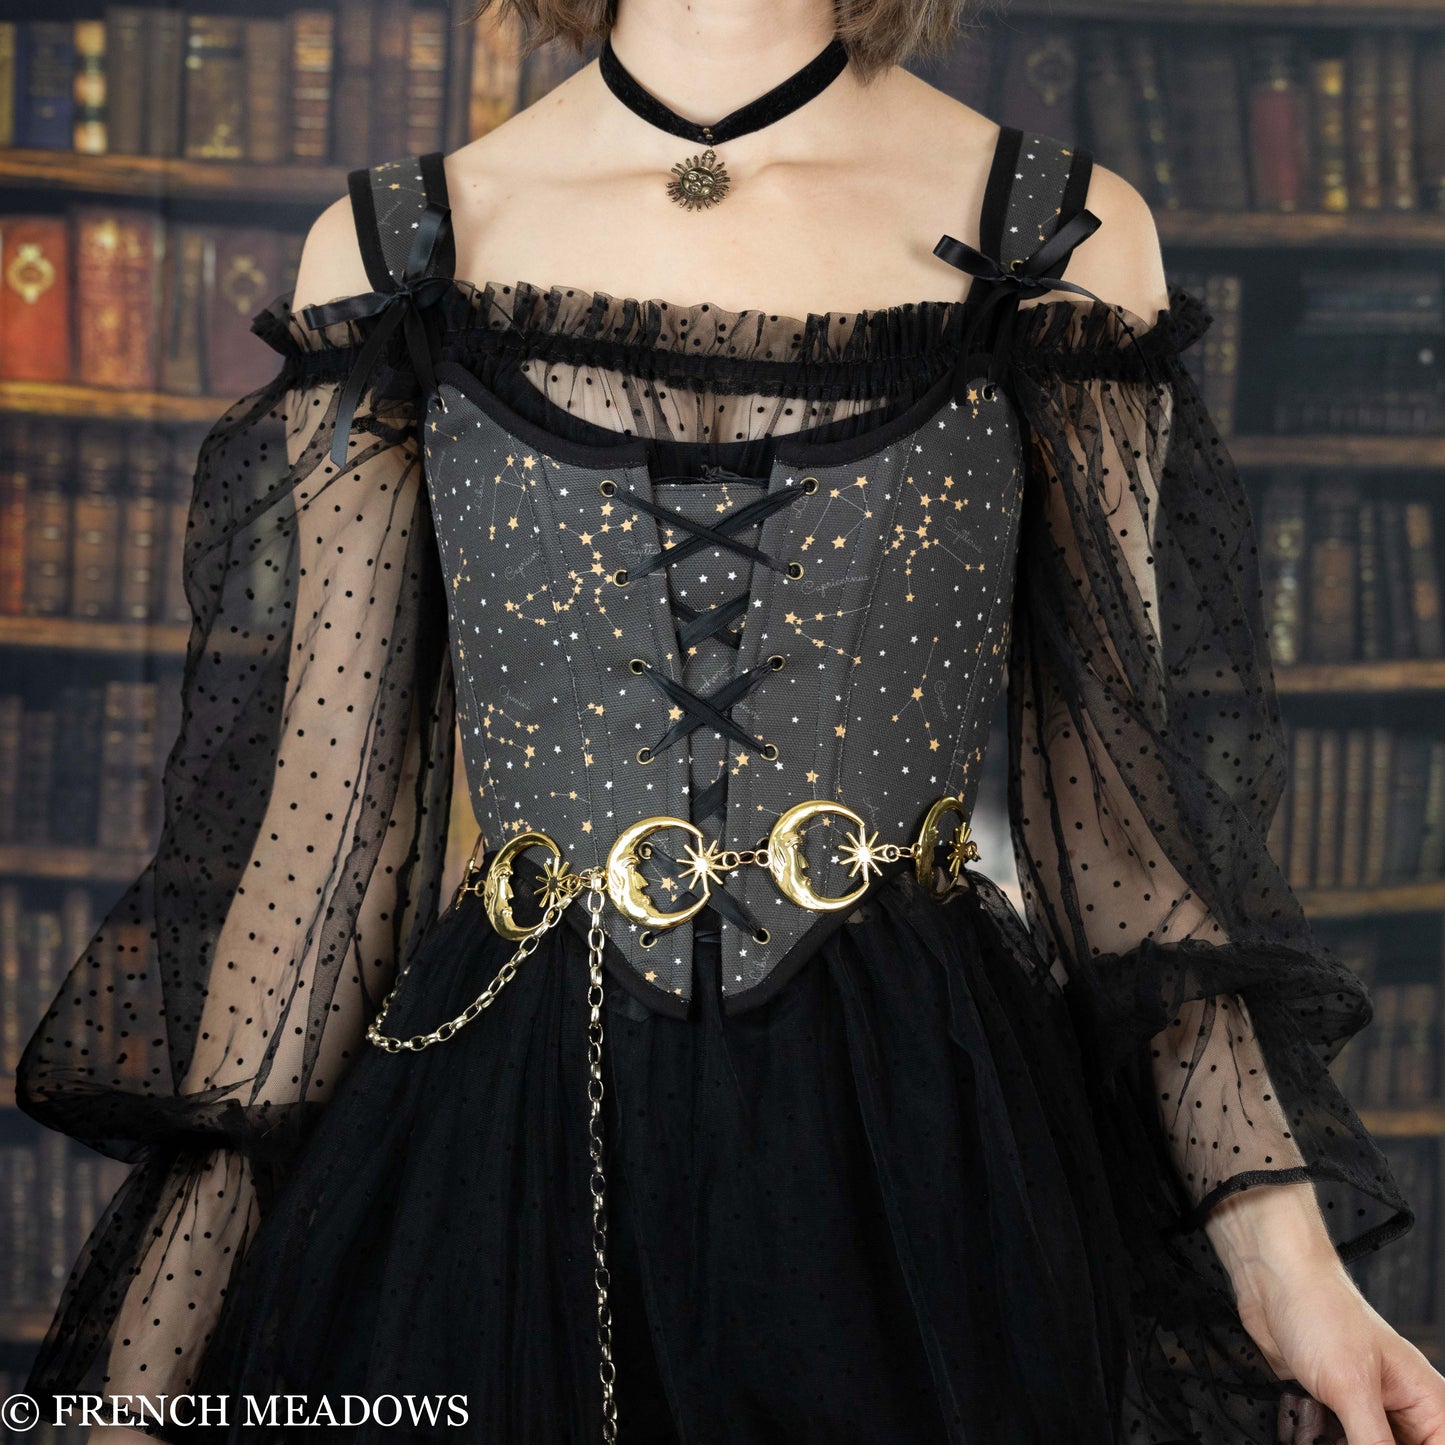 model wearing a black corset top with astrology fabric